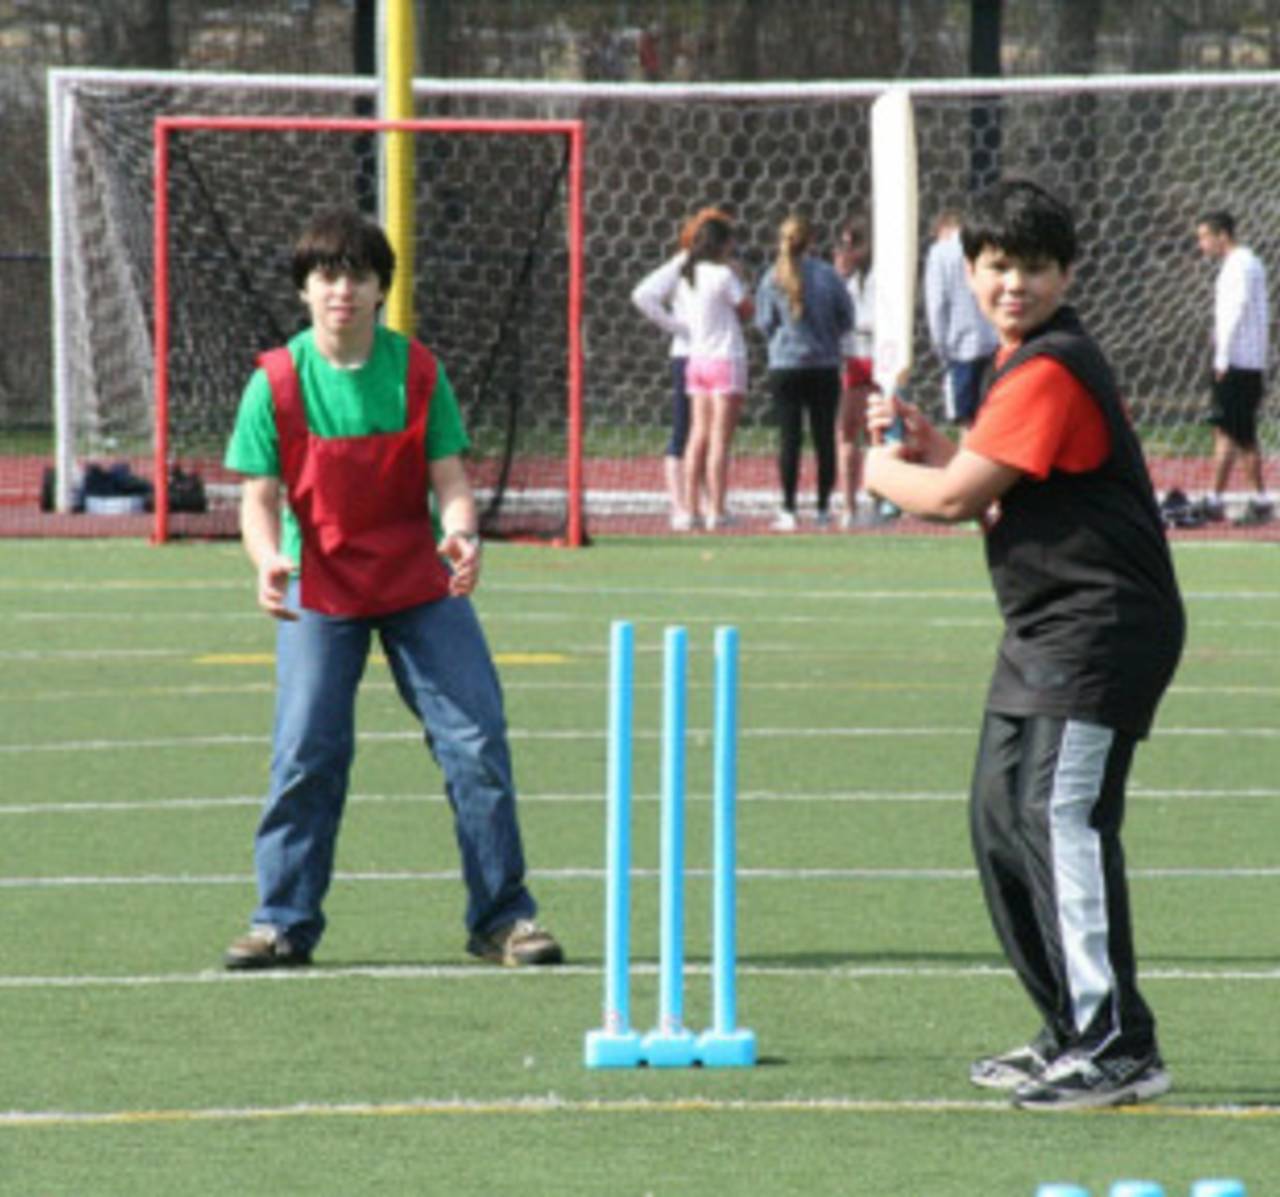 American school kids take a baseball stance at a cricket game